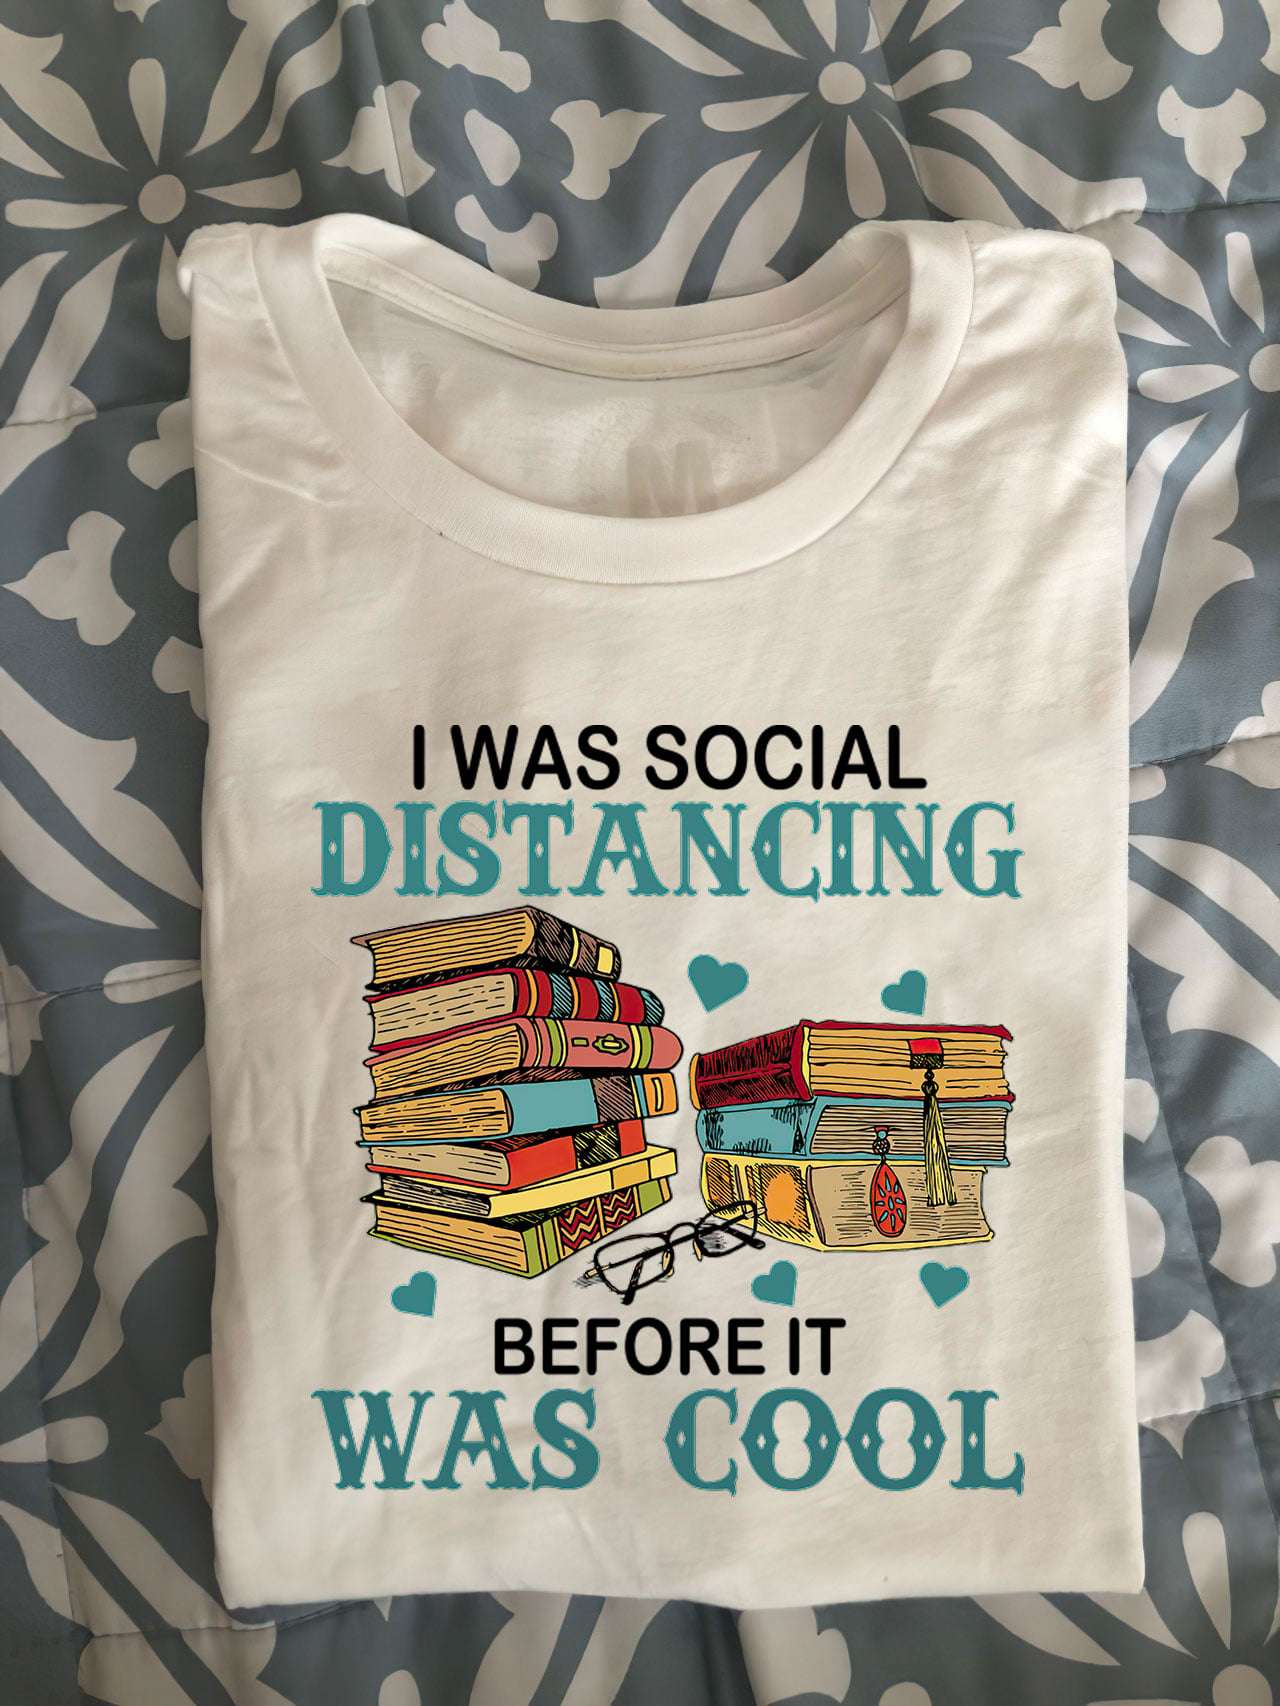 The bookaholic - I was social distancing before was cool